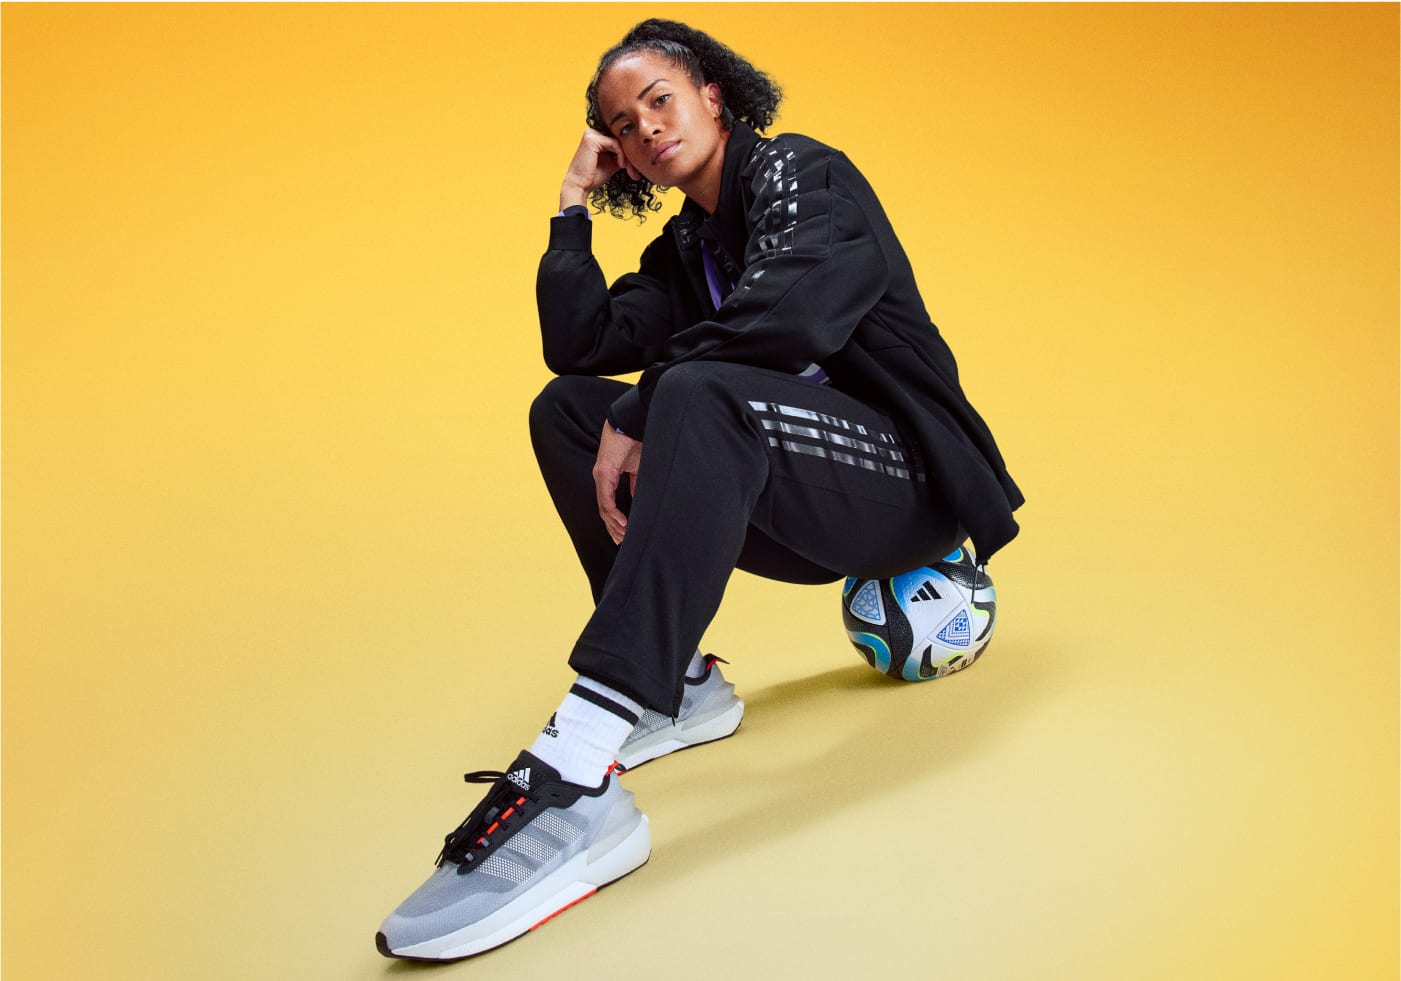 Soccer player Mary Fowler sits posed on a soccer ball, wearing a black adidas tracksuit and sneakers.